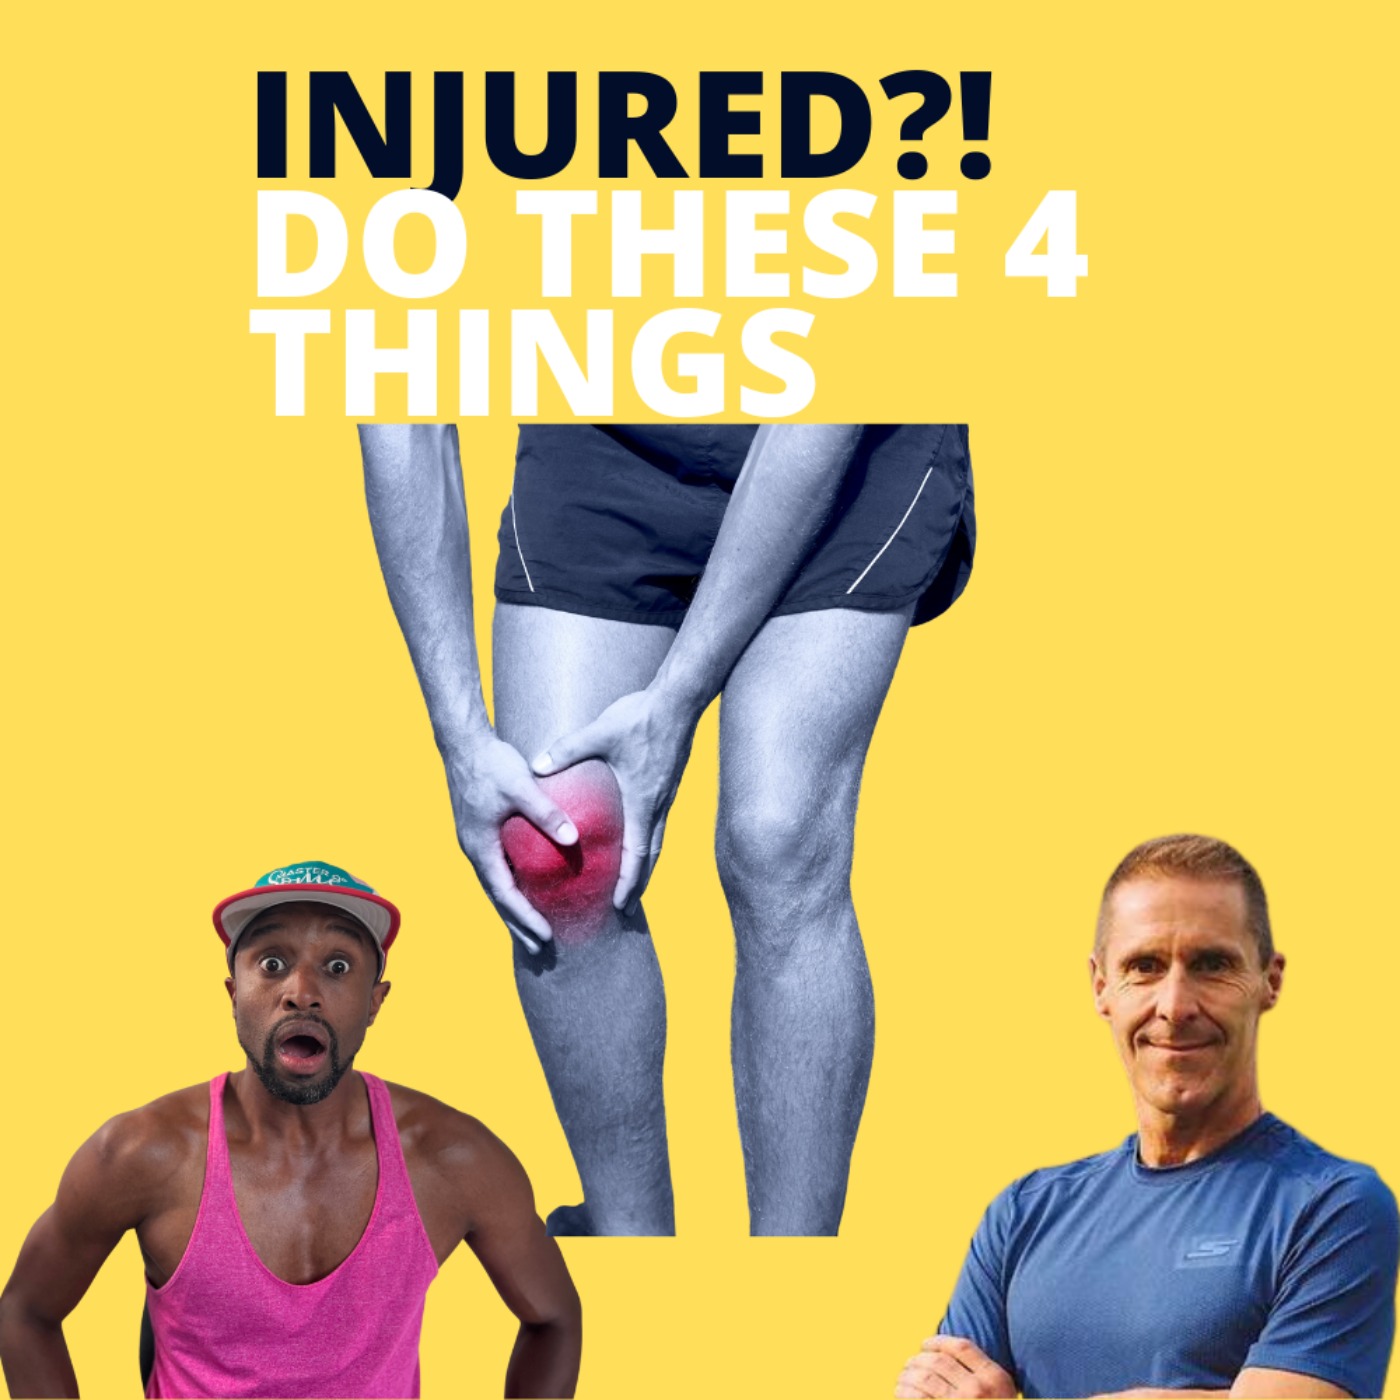 How to Keep Running Even When You're Broken (Injury Part 1)